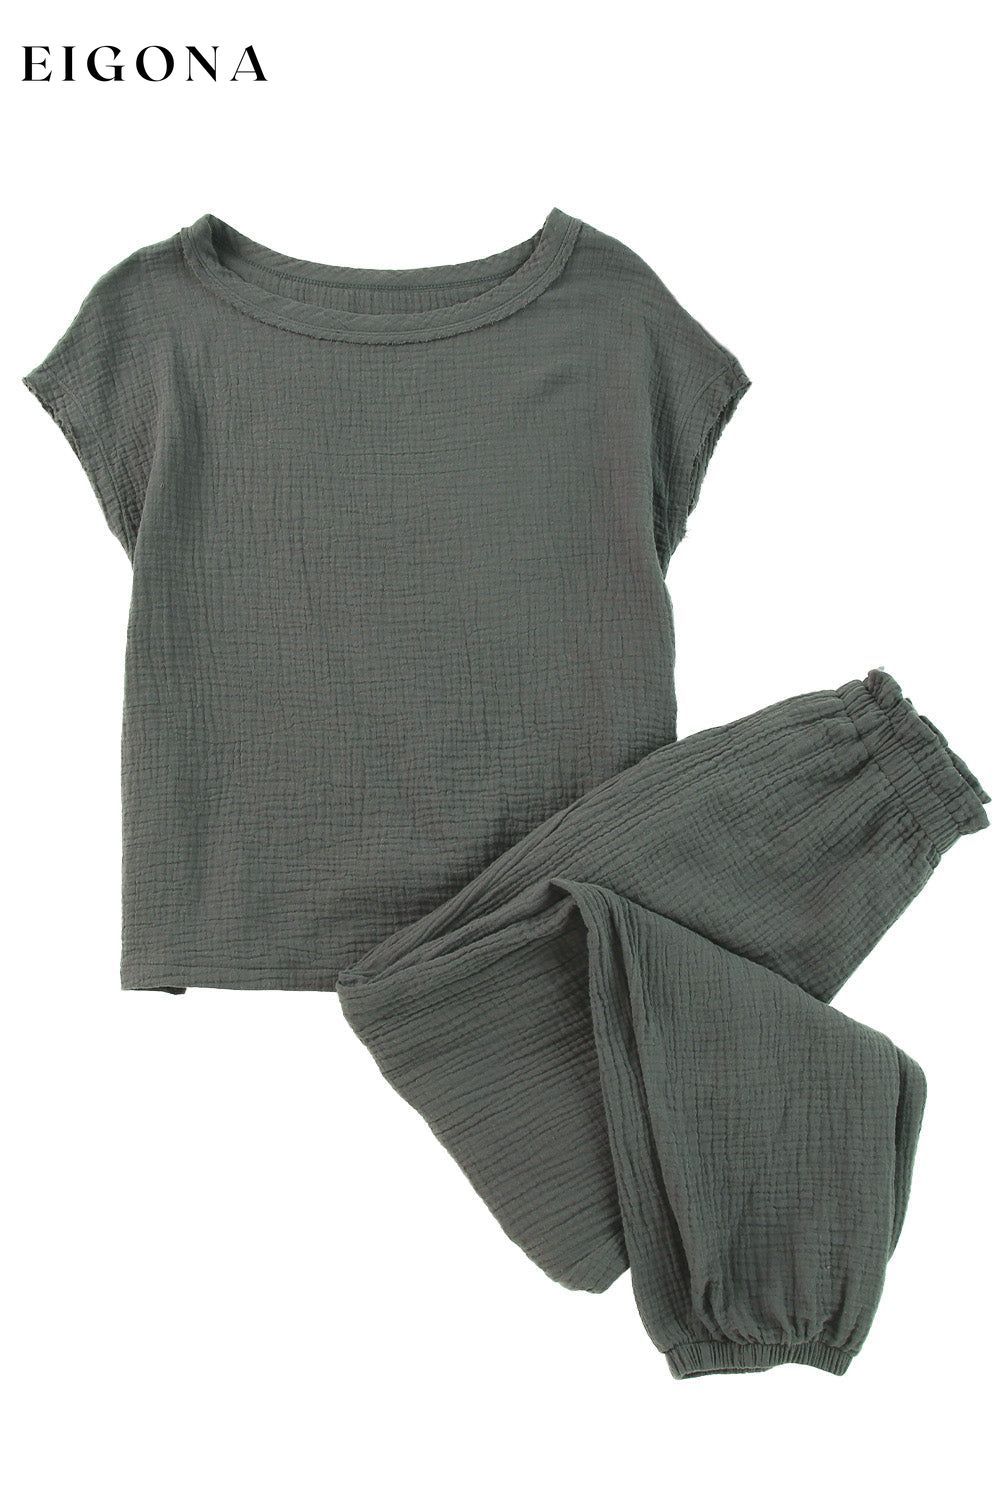 Gray Crinkled Texture Tee and Jogger Pants Set 2 pieces clothes clothing DL Exclusive Fabric Linen Fabric Textured jogger pants set lounge wear loungewear Occasion Daily Occasion Home Print Solid Color Season Summer set sets Style Casual